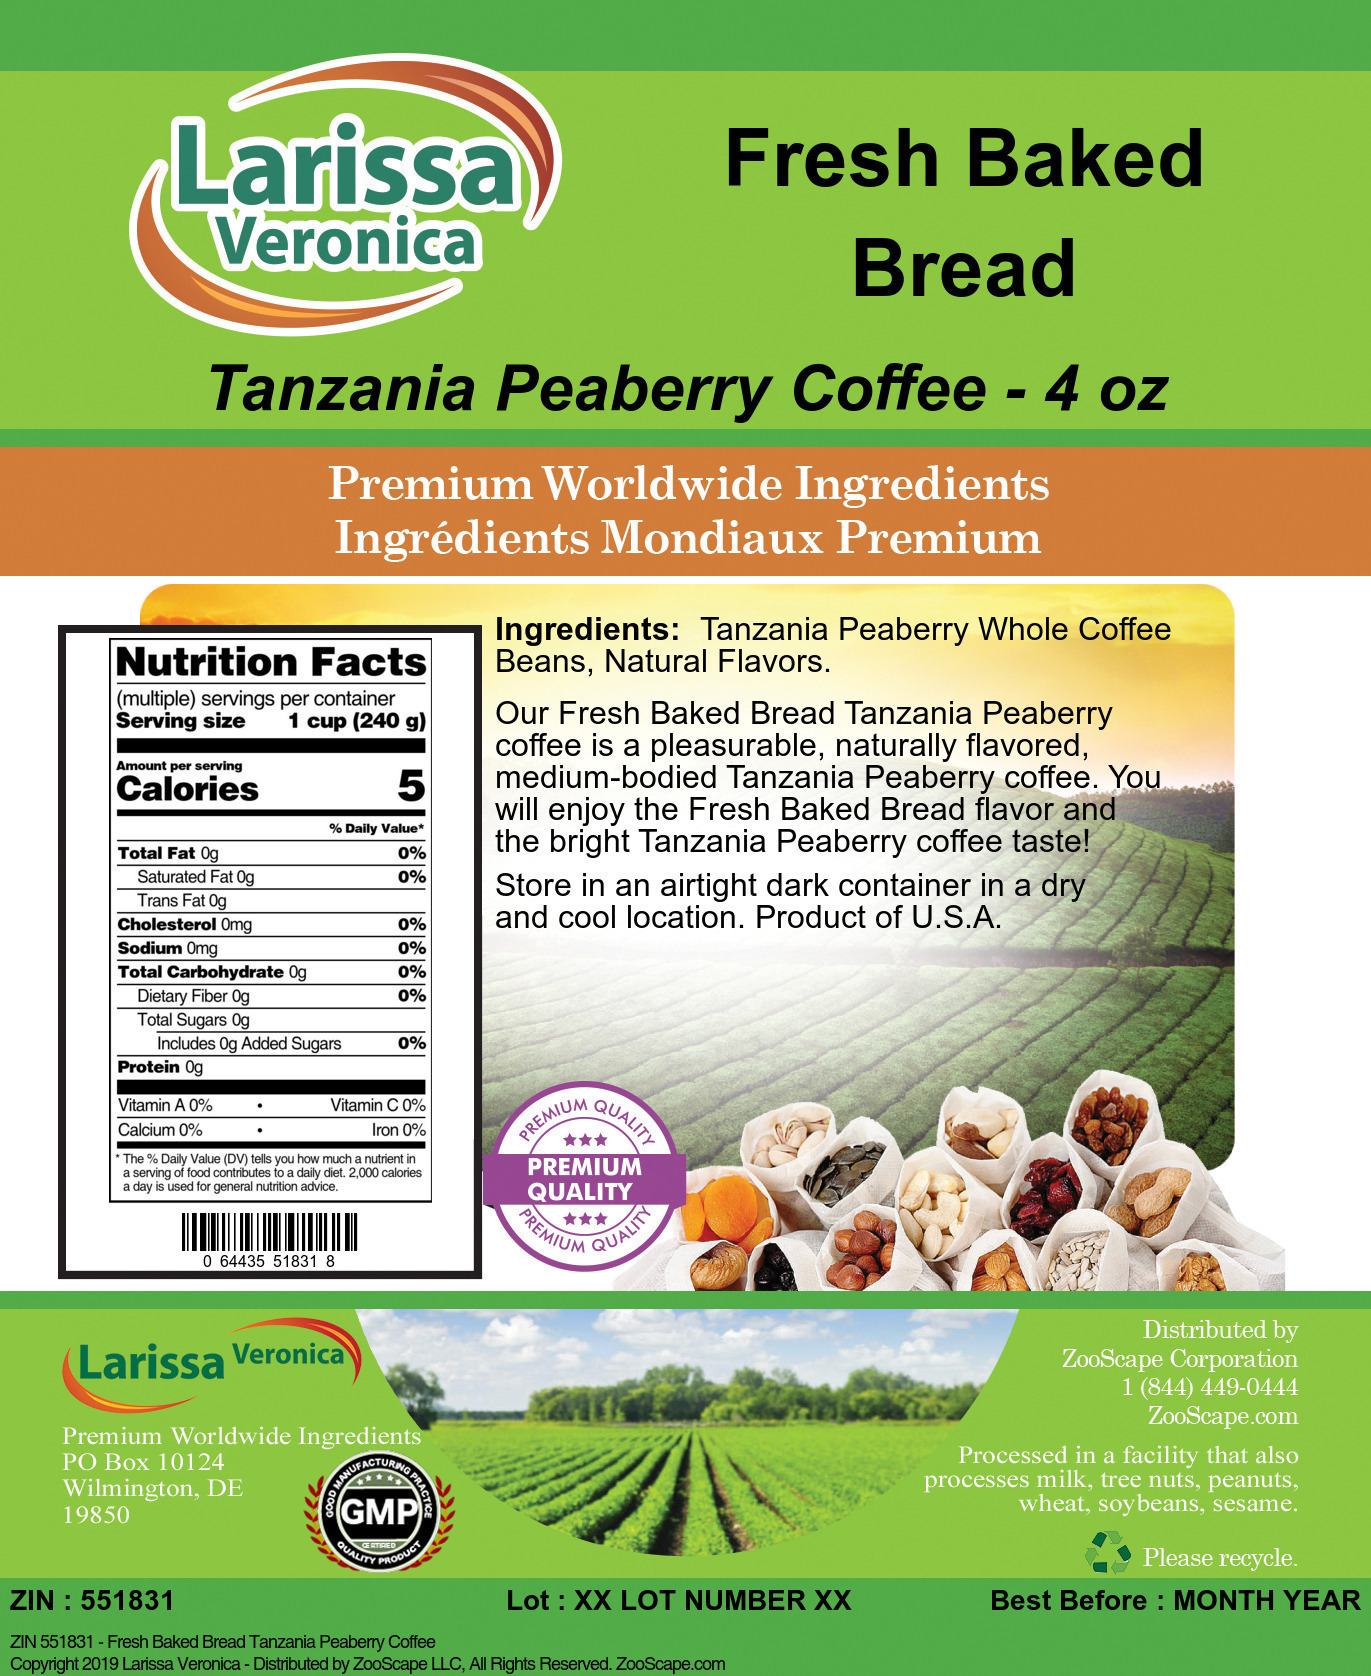 Fresh Baked Bread Tanzania Peaberry Coffee - Label